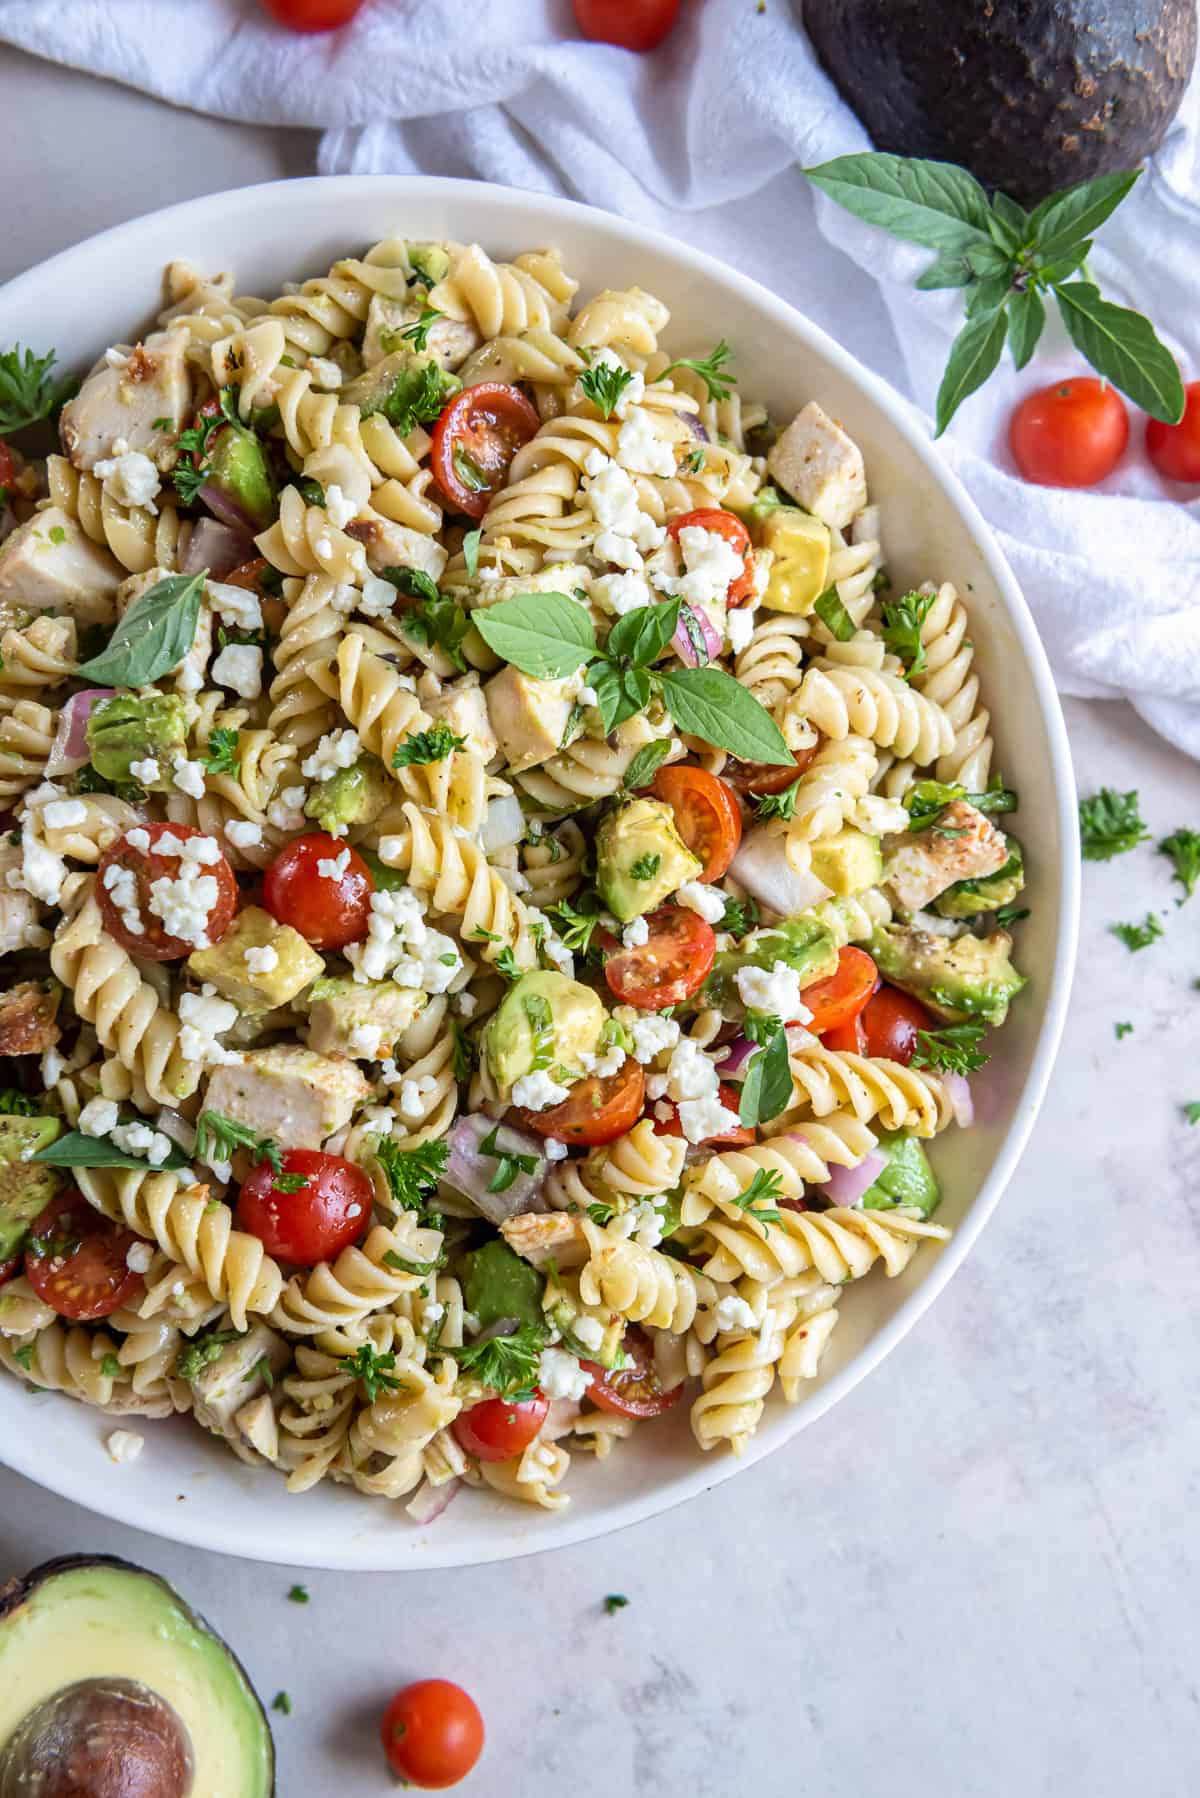 Pasta salad with avocado, chicken, and tomatoes in a white bowl with spoons.